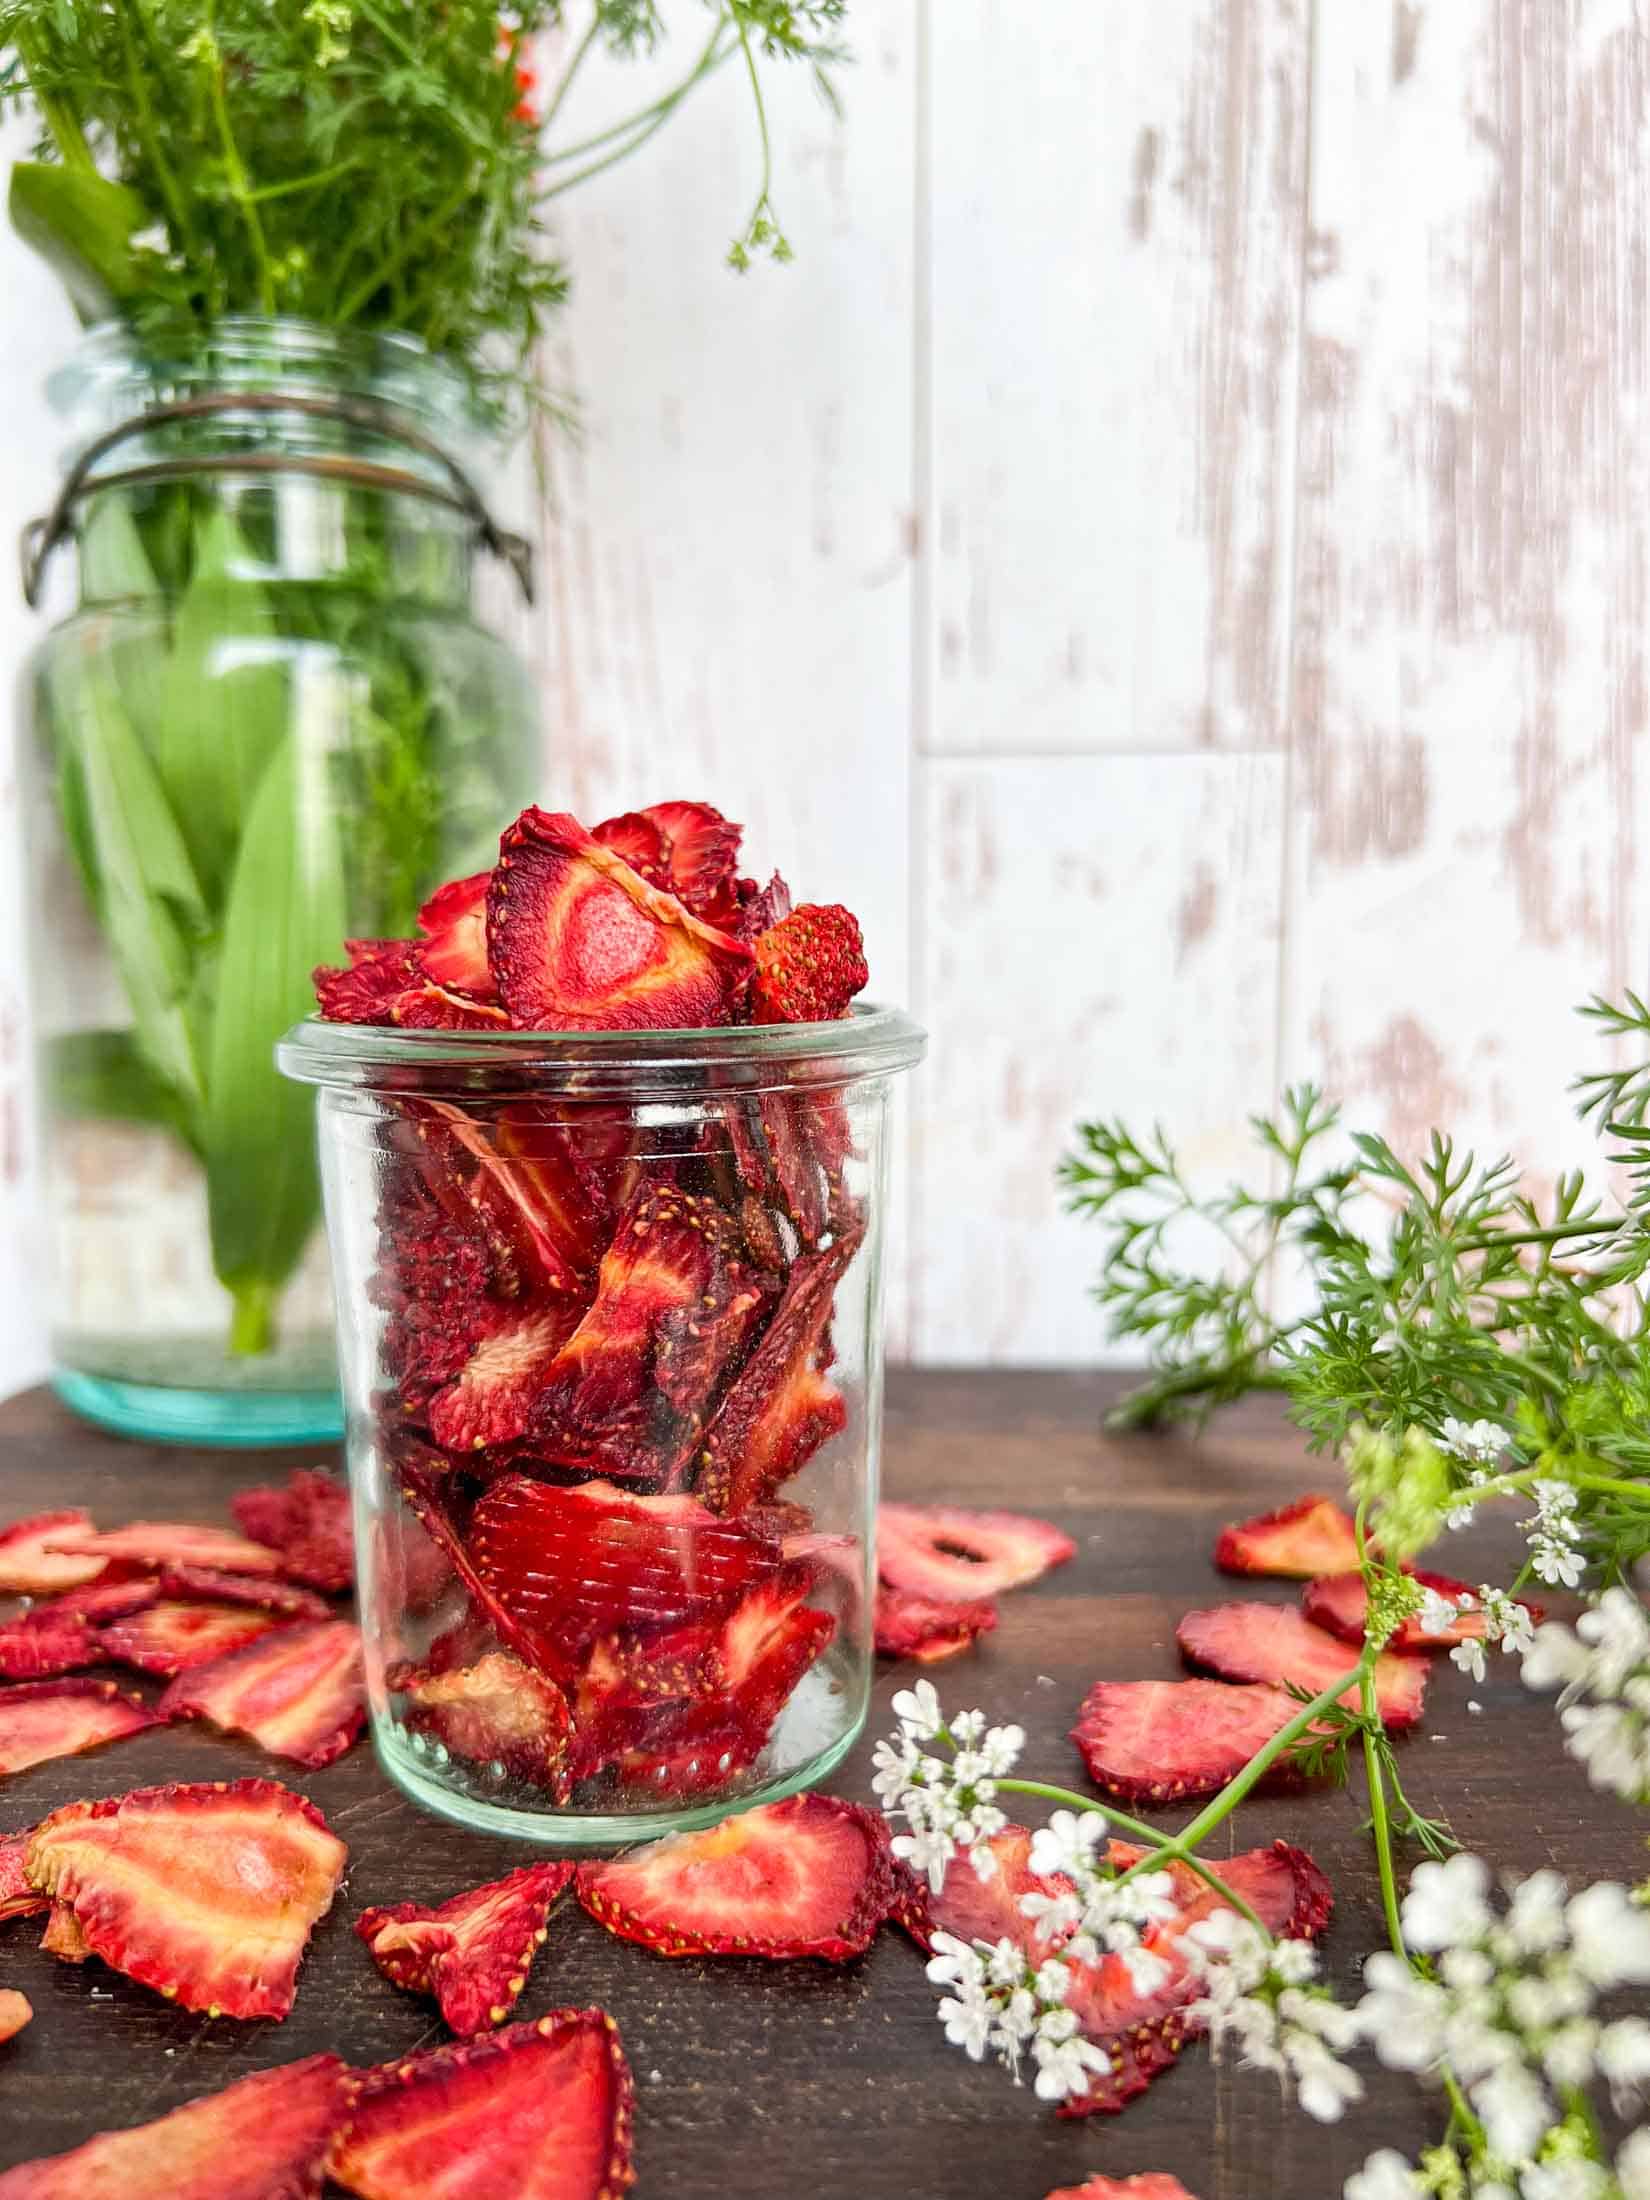 Ultimate Guide to Dehydrated Strawberries | Dehydrator, Oven, Air Fryer